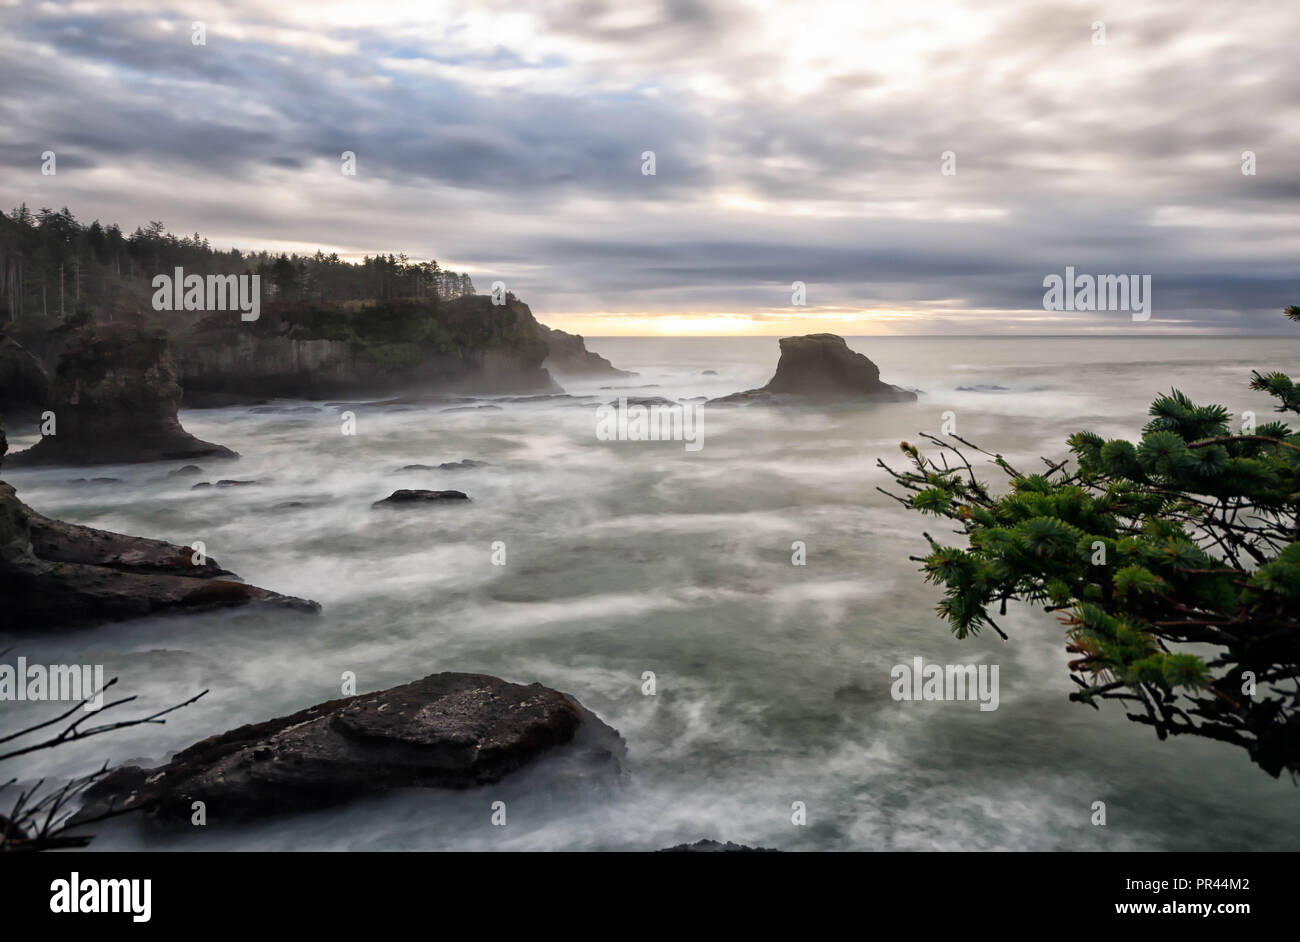 A view of Cape Flattery, WA at sunset. Taken with a 10-stop ND filter. Stock Photo